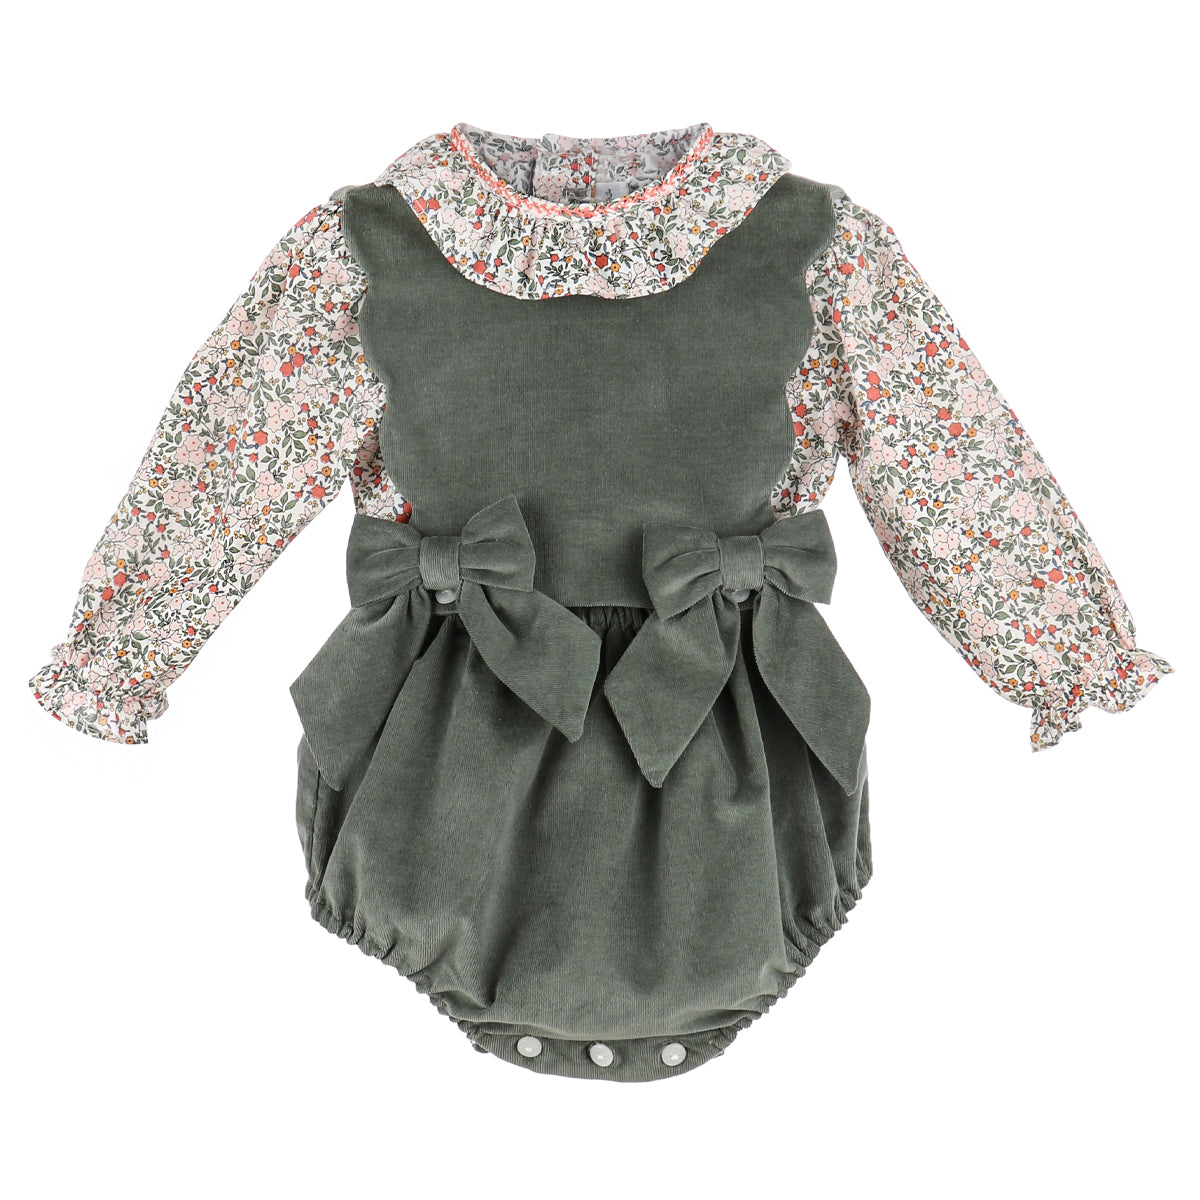 Maple Market Floral Scallop Overall